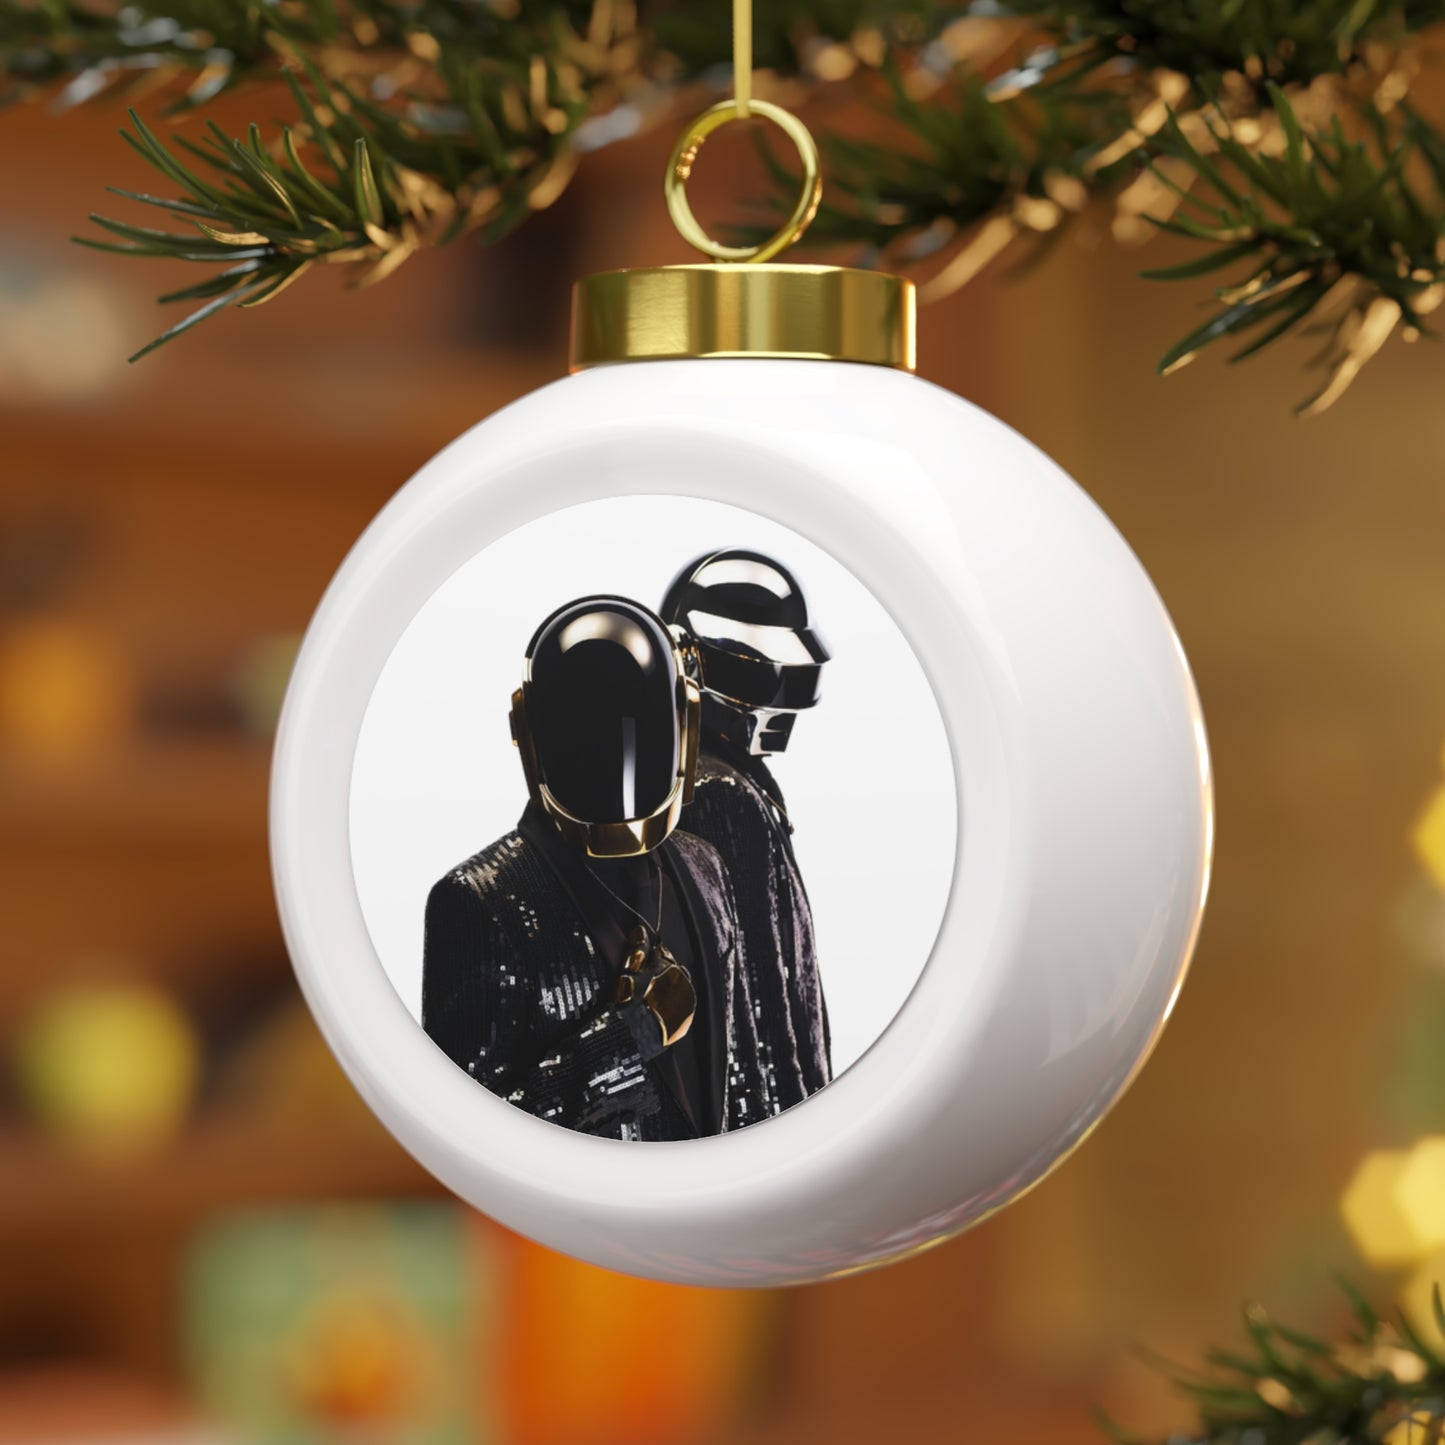 Daft Punk In Black Suits Christmas Ball Ornament